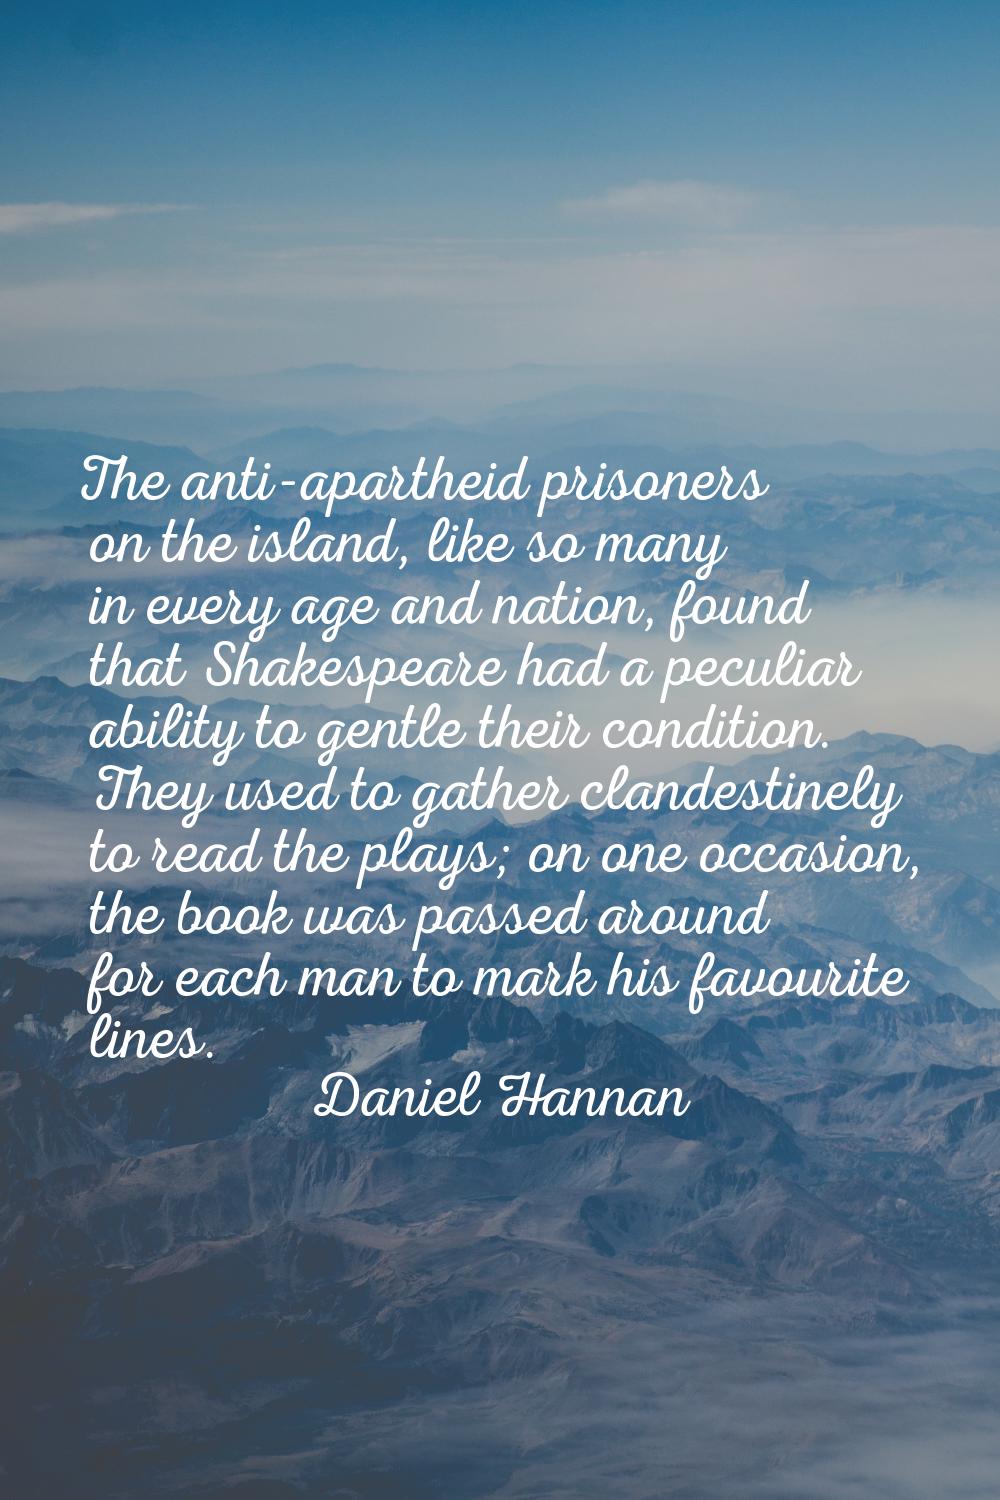 The anti-apartheid prisoners on the island, like so many in every age and nation, found that Shakes